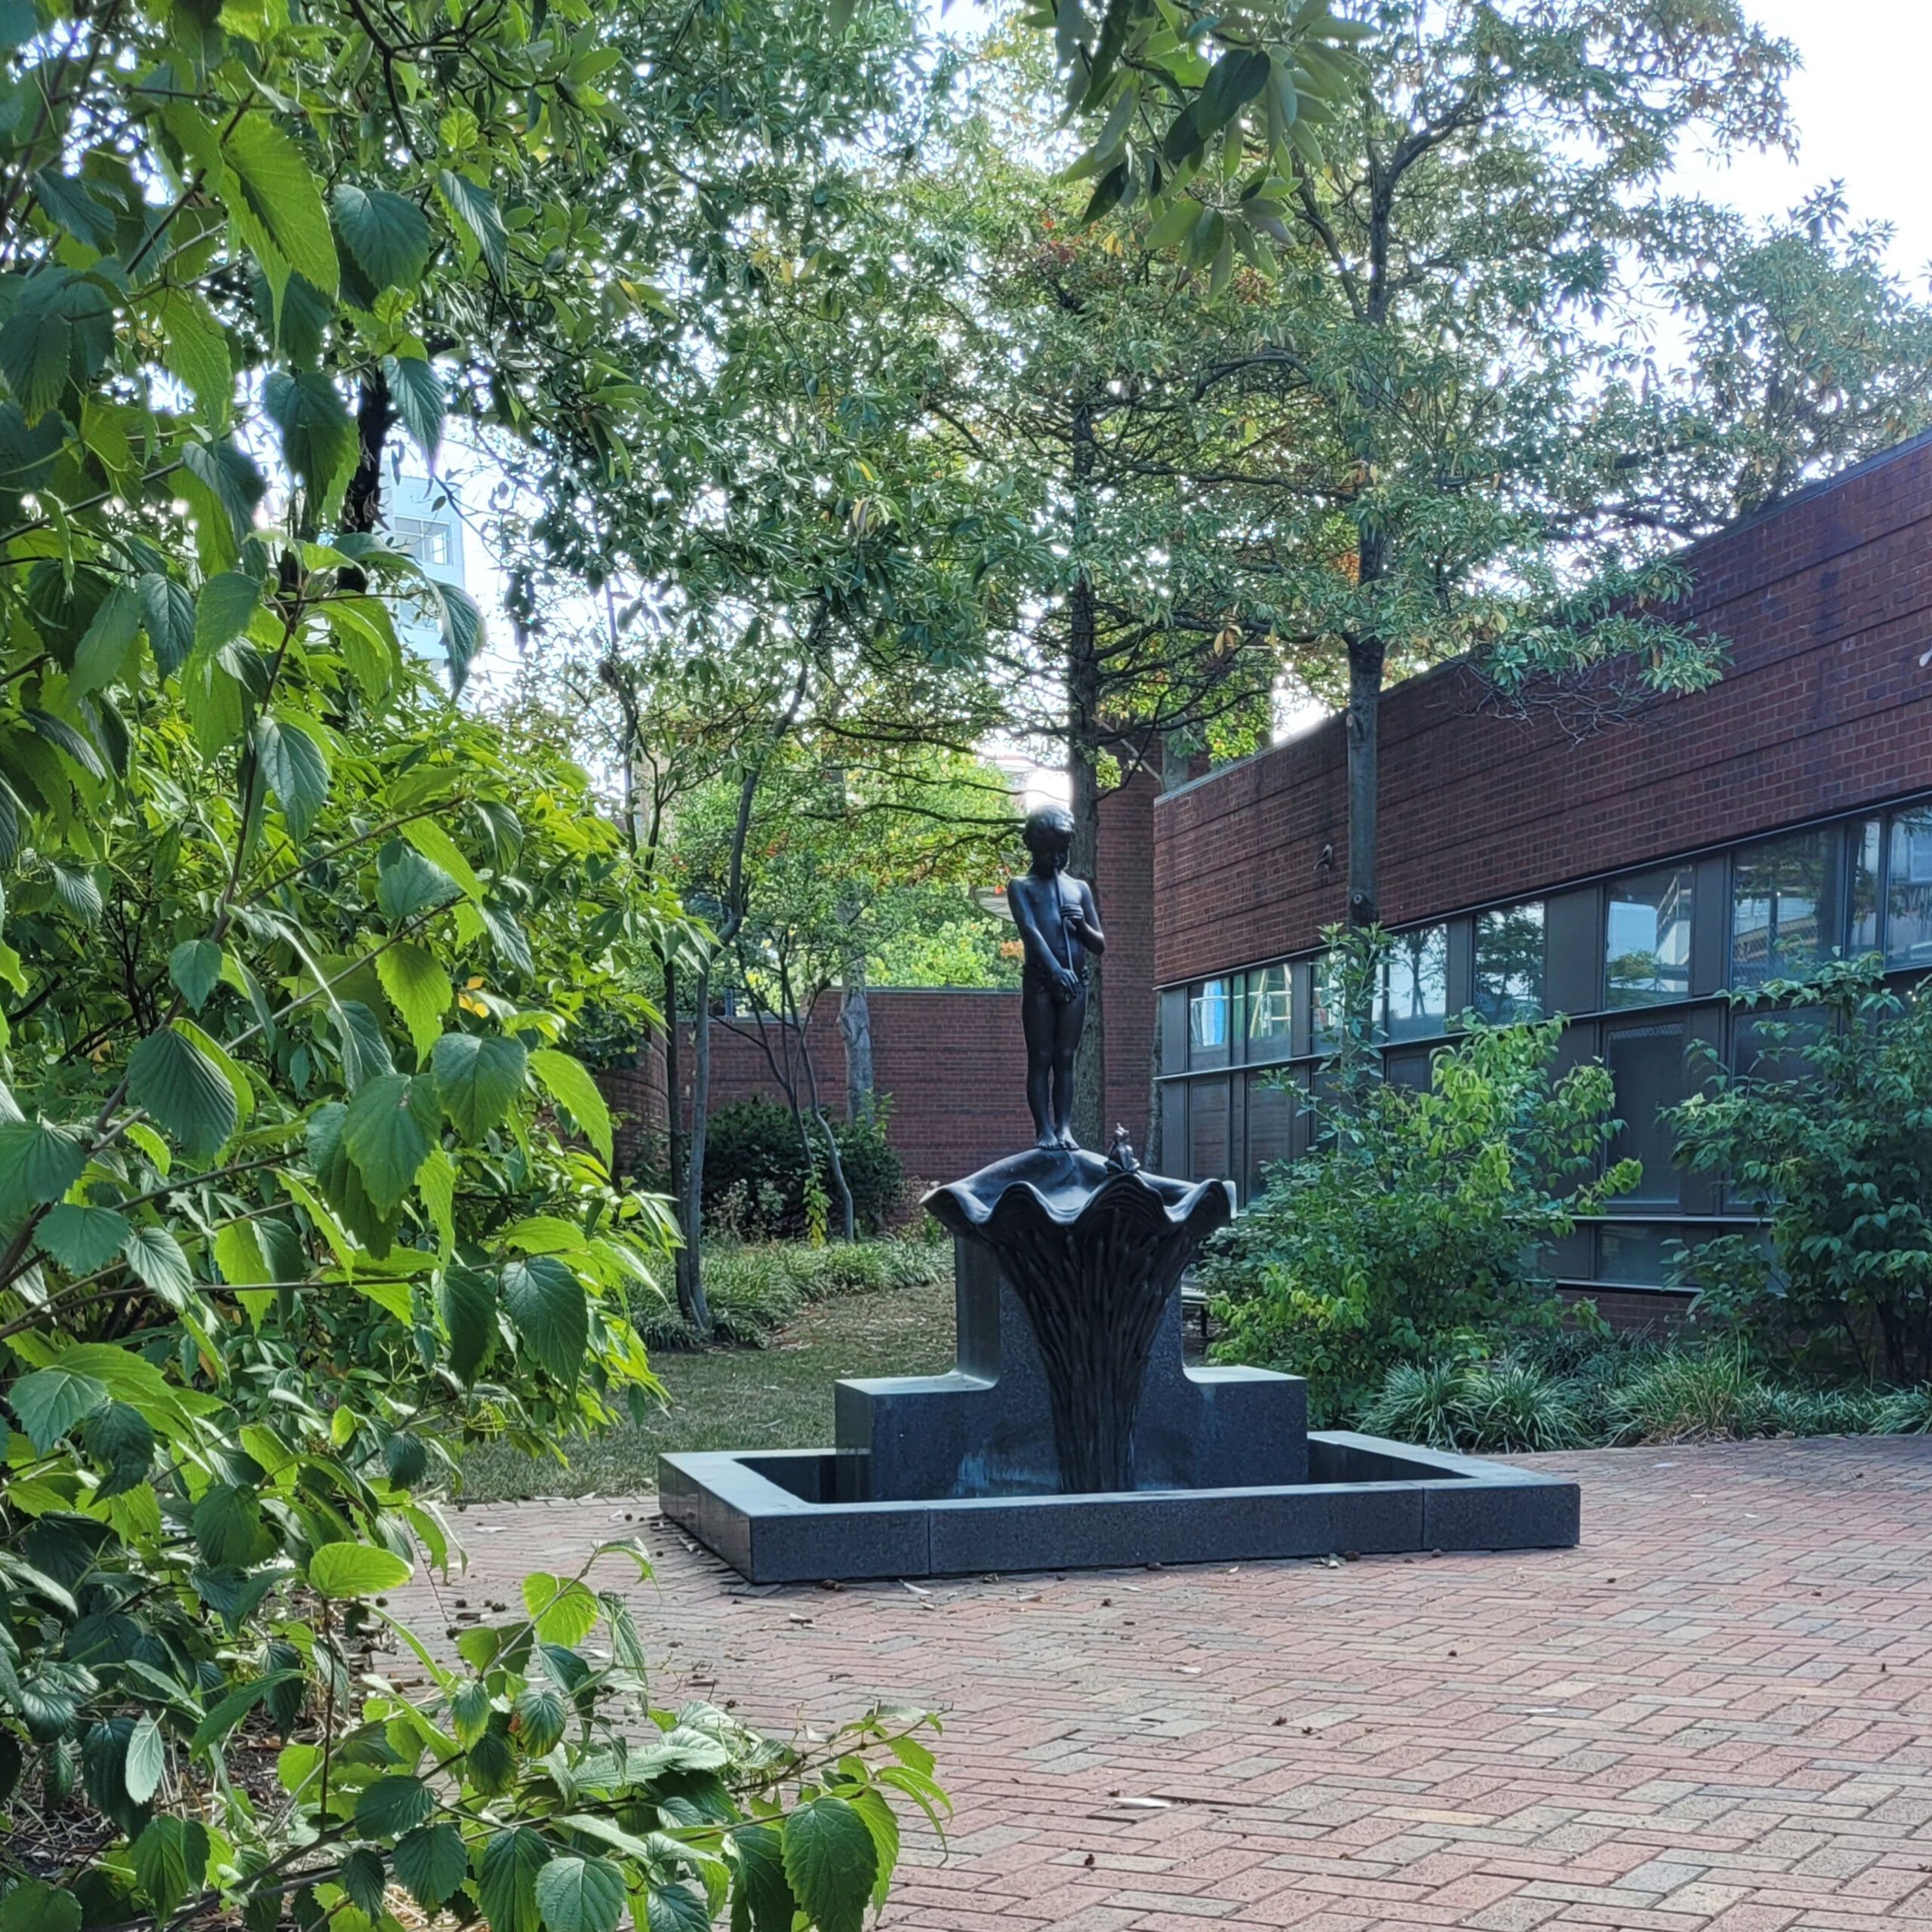 A statue of a nude boy holding a flute and standing on a lily pad surrounded by a greenspace